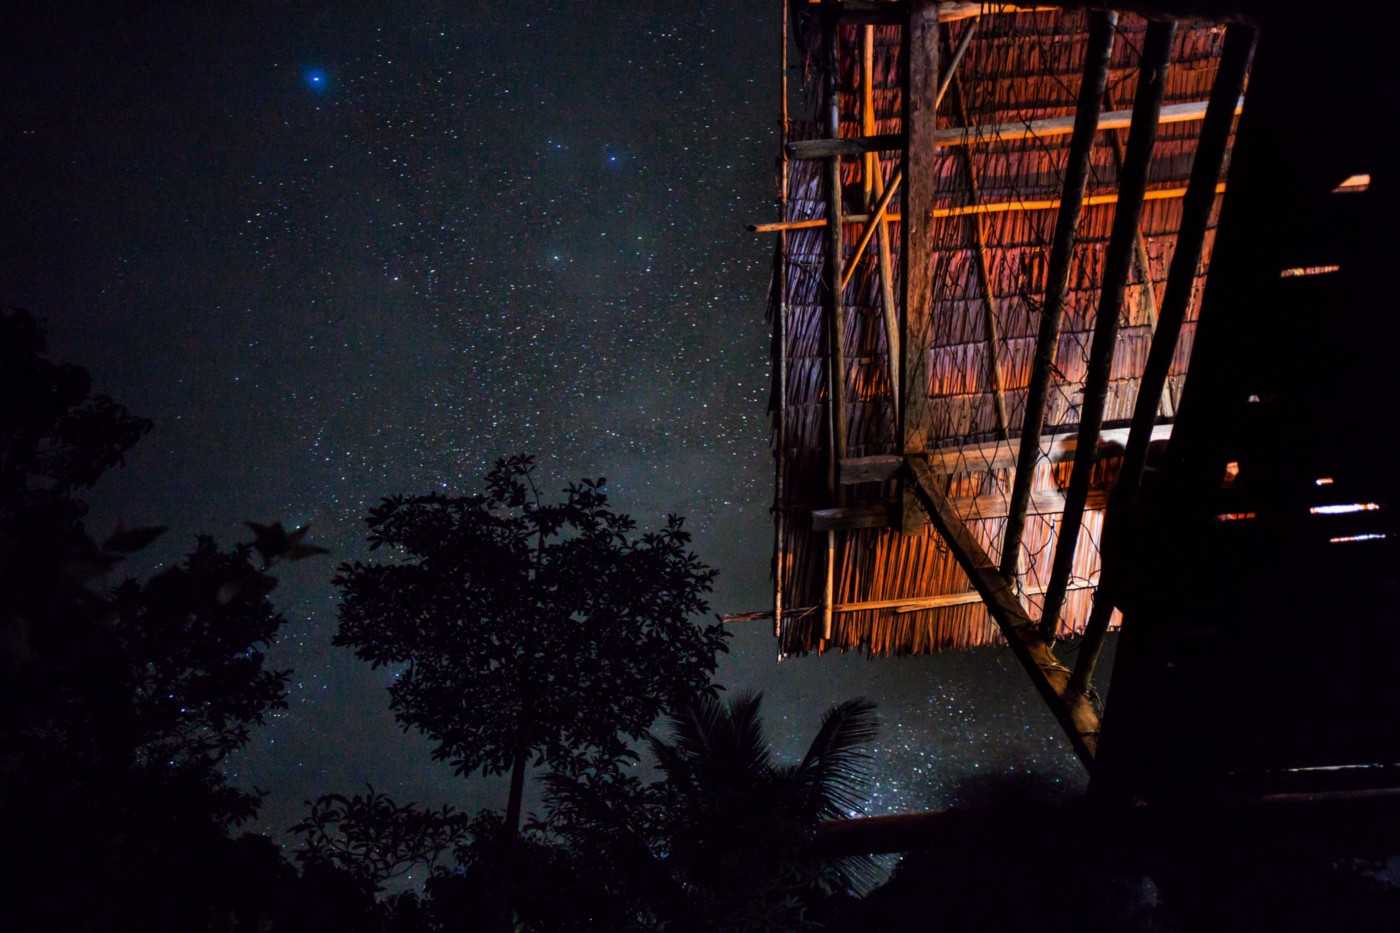 A starry night in Lorang, a village in central Aru. By Leo Plunkett/The Gecko Project.